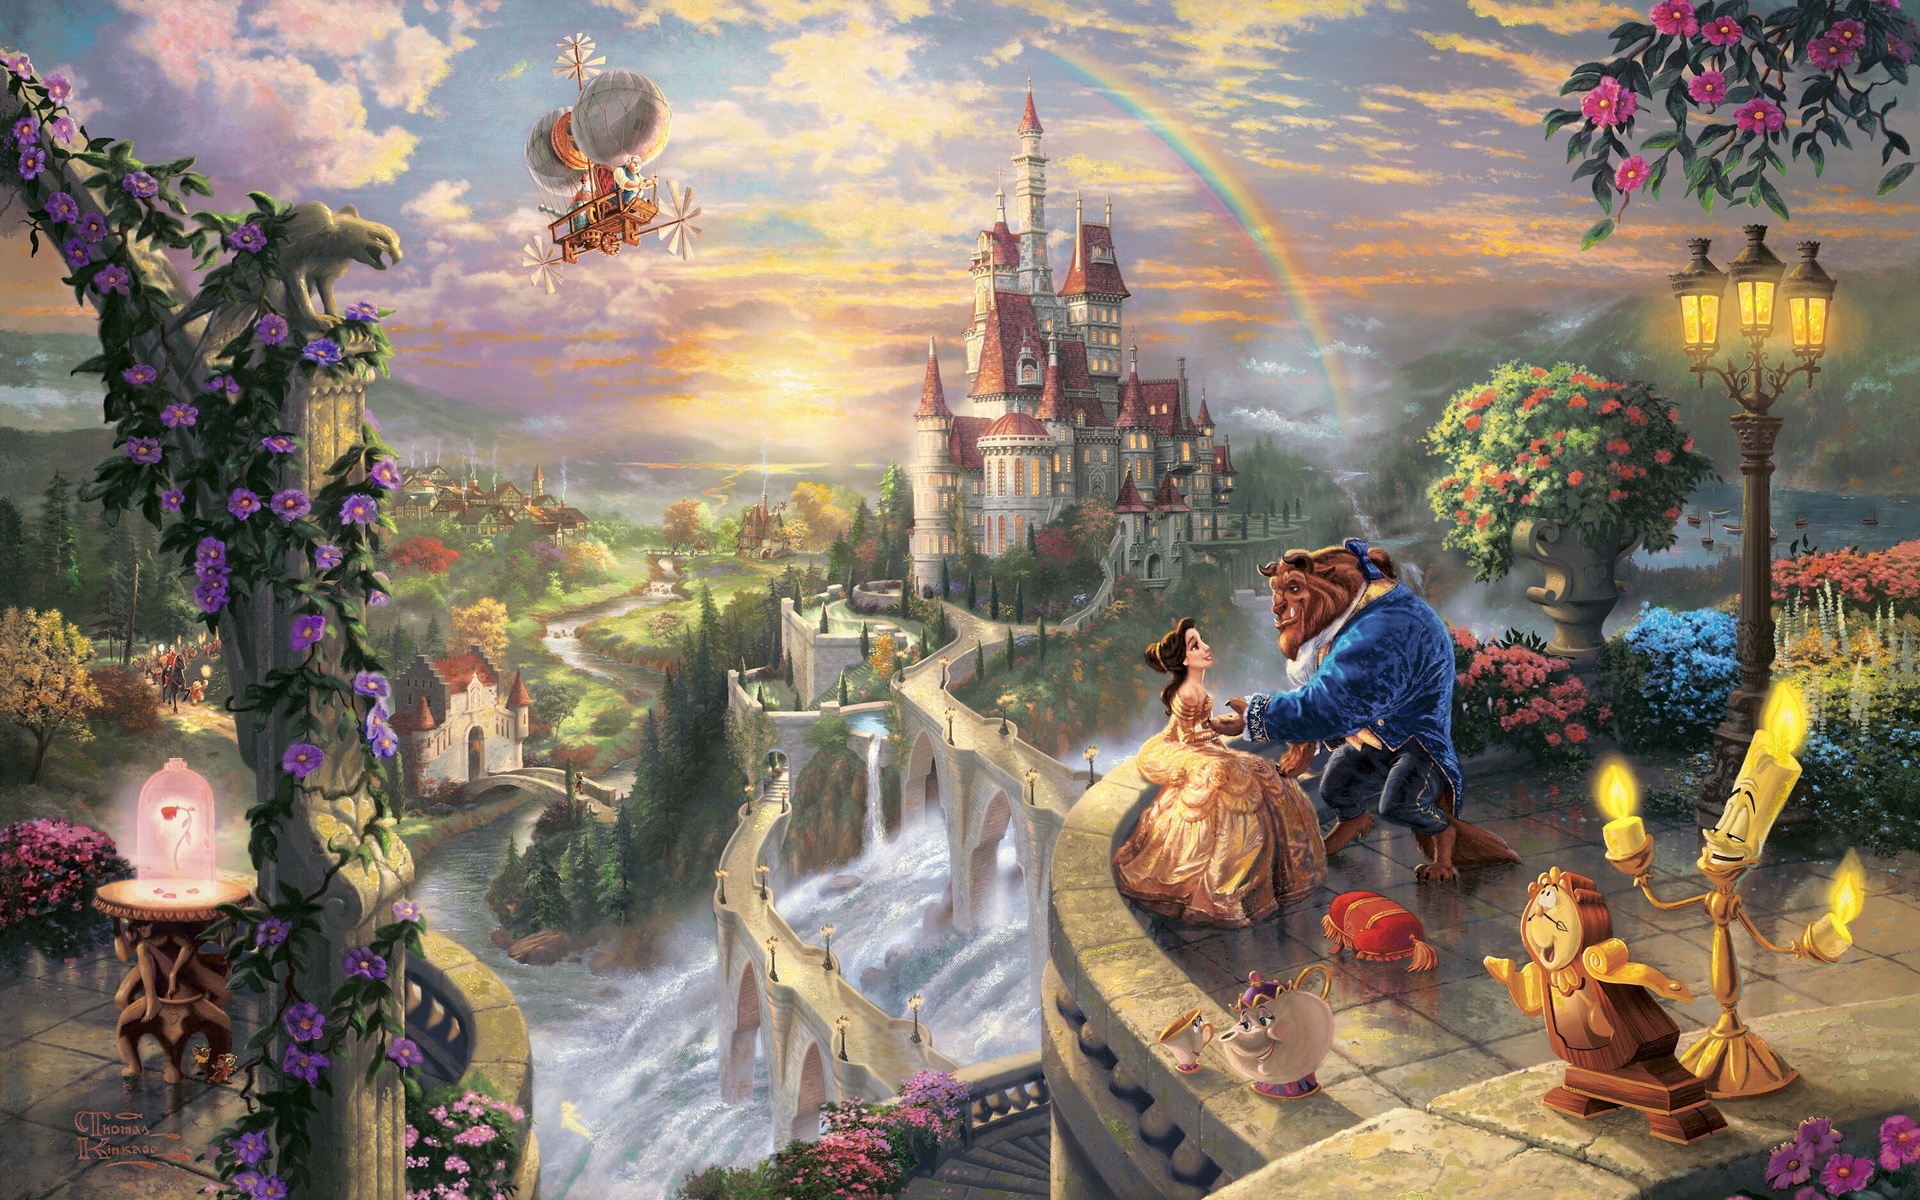 Thomas kinkade, the disney dreams collection, beauty and the beast falling in love